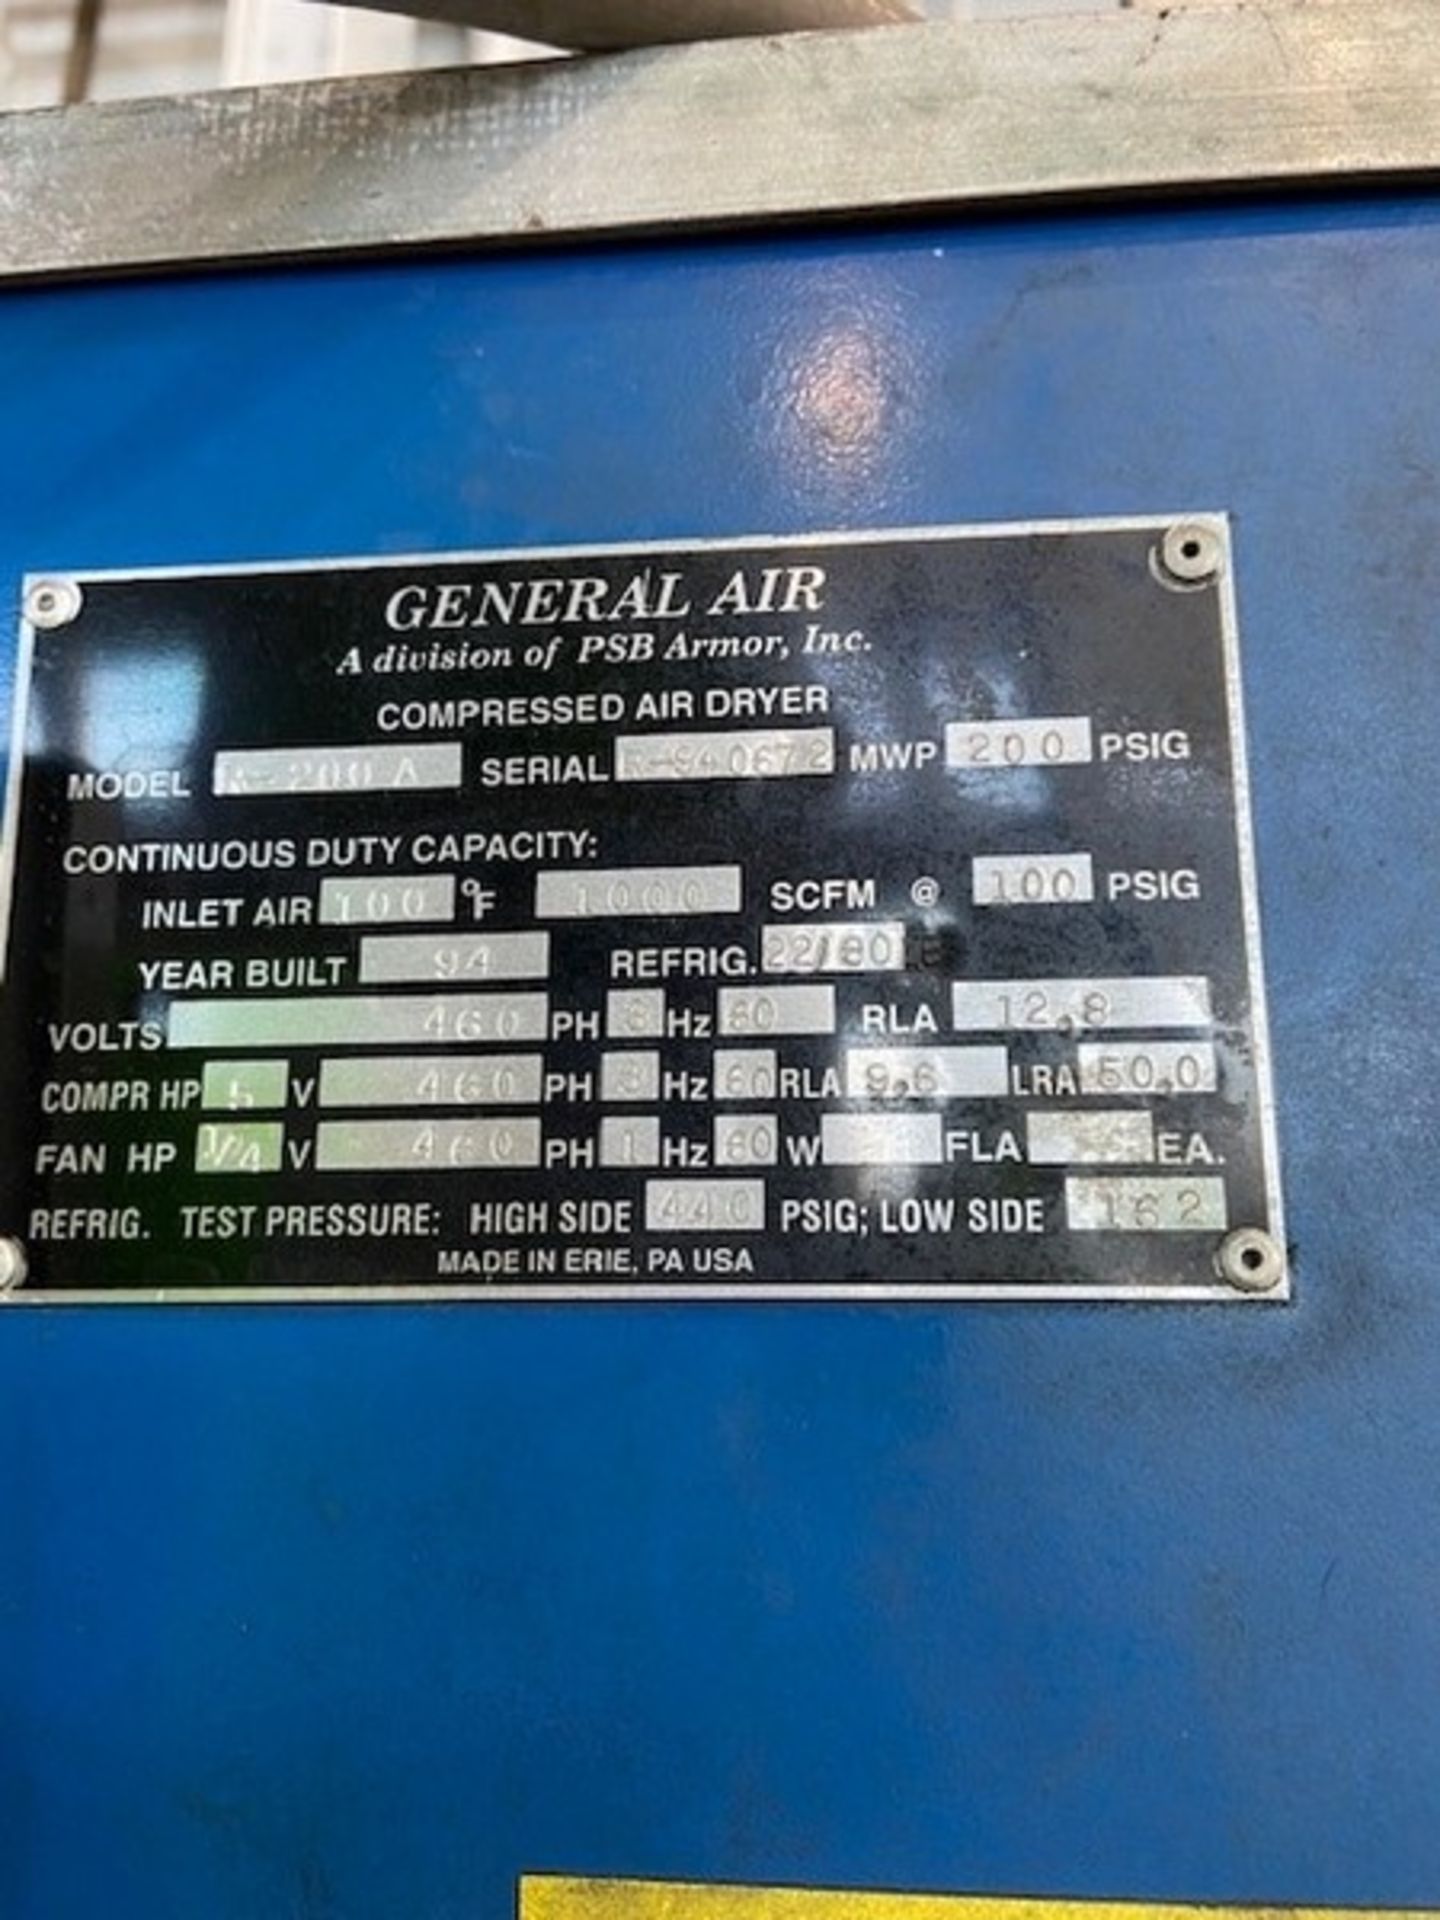 General Air & Gas Dryer,M/N R-200A, S/N R-940672, MWP 200 PSIG, 460 Volts, 3 Phase (INV#68358) ( - Image 5 of 9